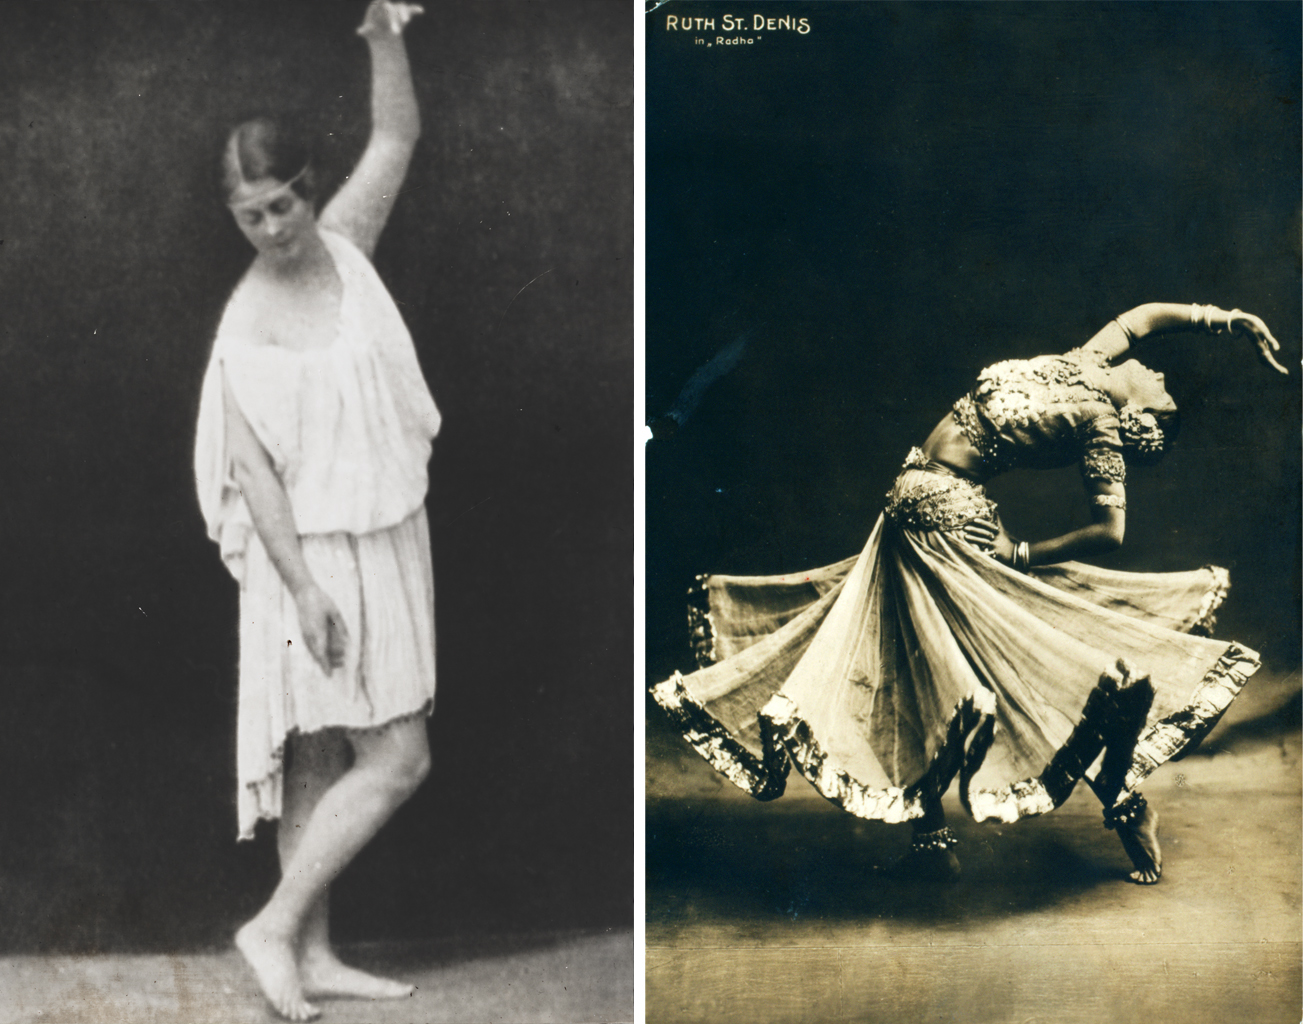 Left: Isadora Duncan dancing, 1903; right: Ruth St. Denis in Radha, c. 1906 (New York Public Library)